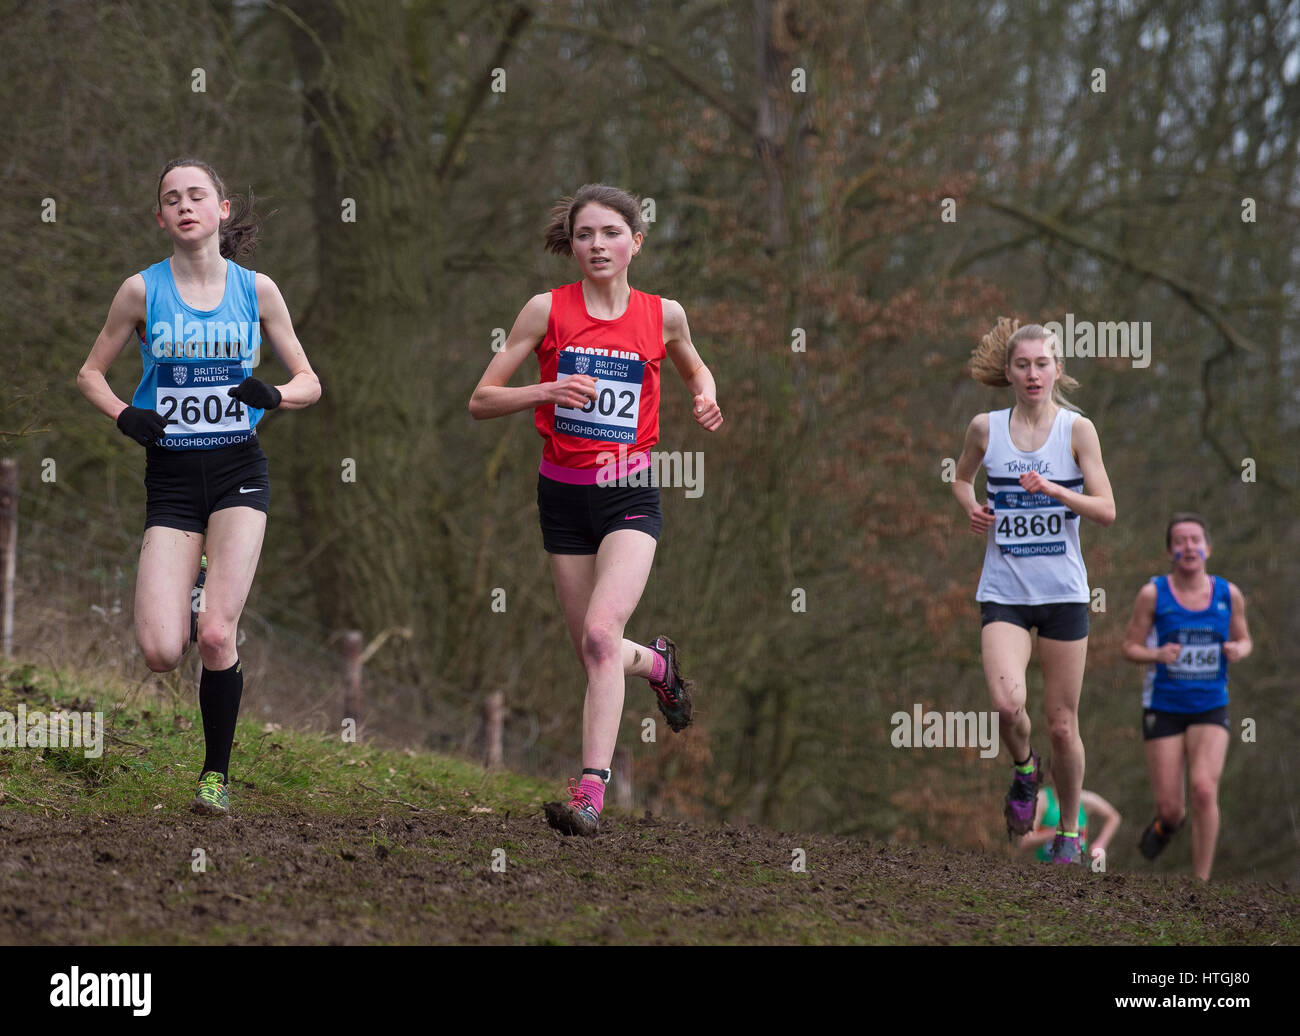 Prestwold Hall, Loughborough 11 Anna MacFadyen (2602) on her way to winning the U20 Women's race at the British Athletics Inter Counties Cross Country Championships incorporating World Junior Trials and Cross Challenge Final, Prestwold Hall, Loughborough, Saturday 11th March 2017 Credit: Gary Mitchell/Alamy Live News Stock Photo